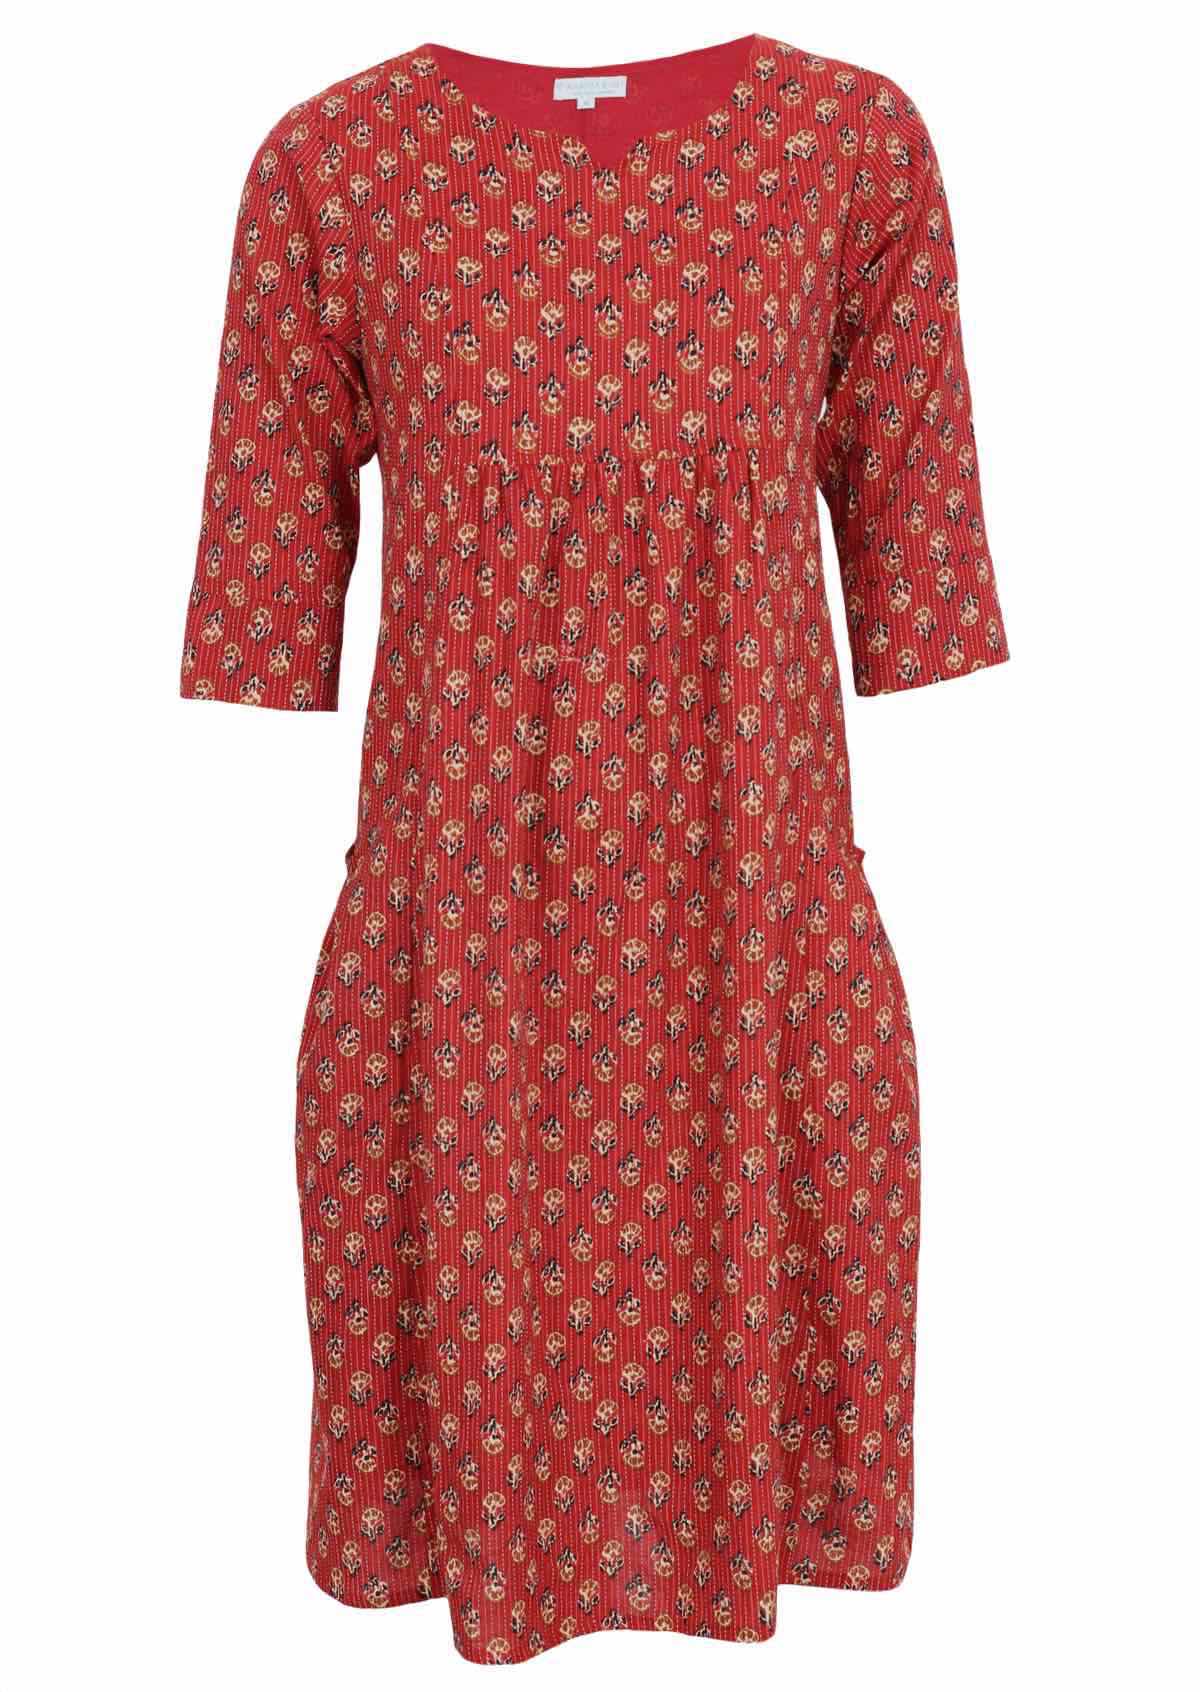 Red floral dress features pin tucks and kantha stitches for visual interest. 